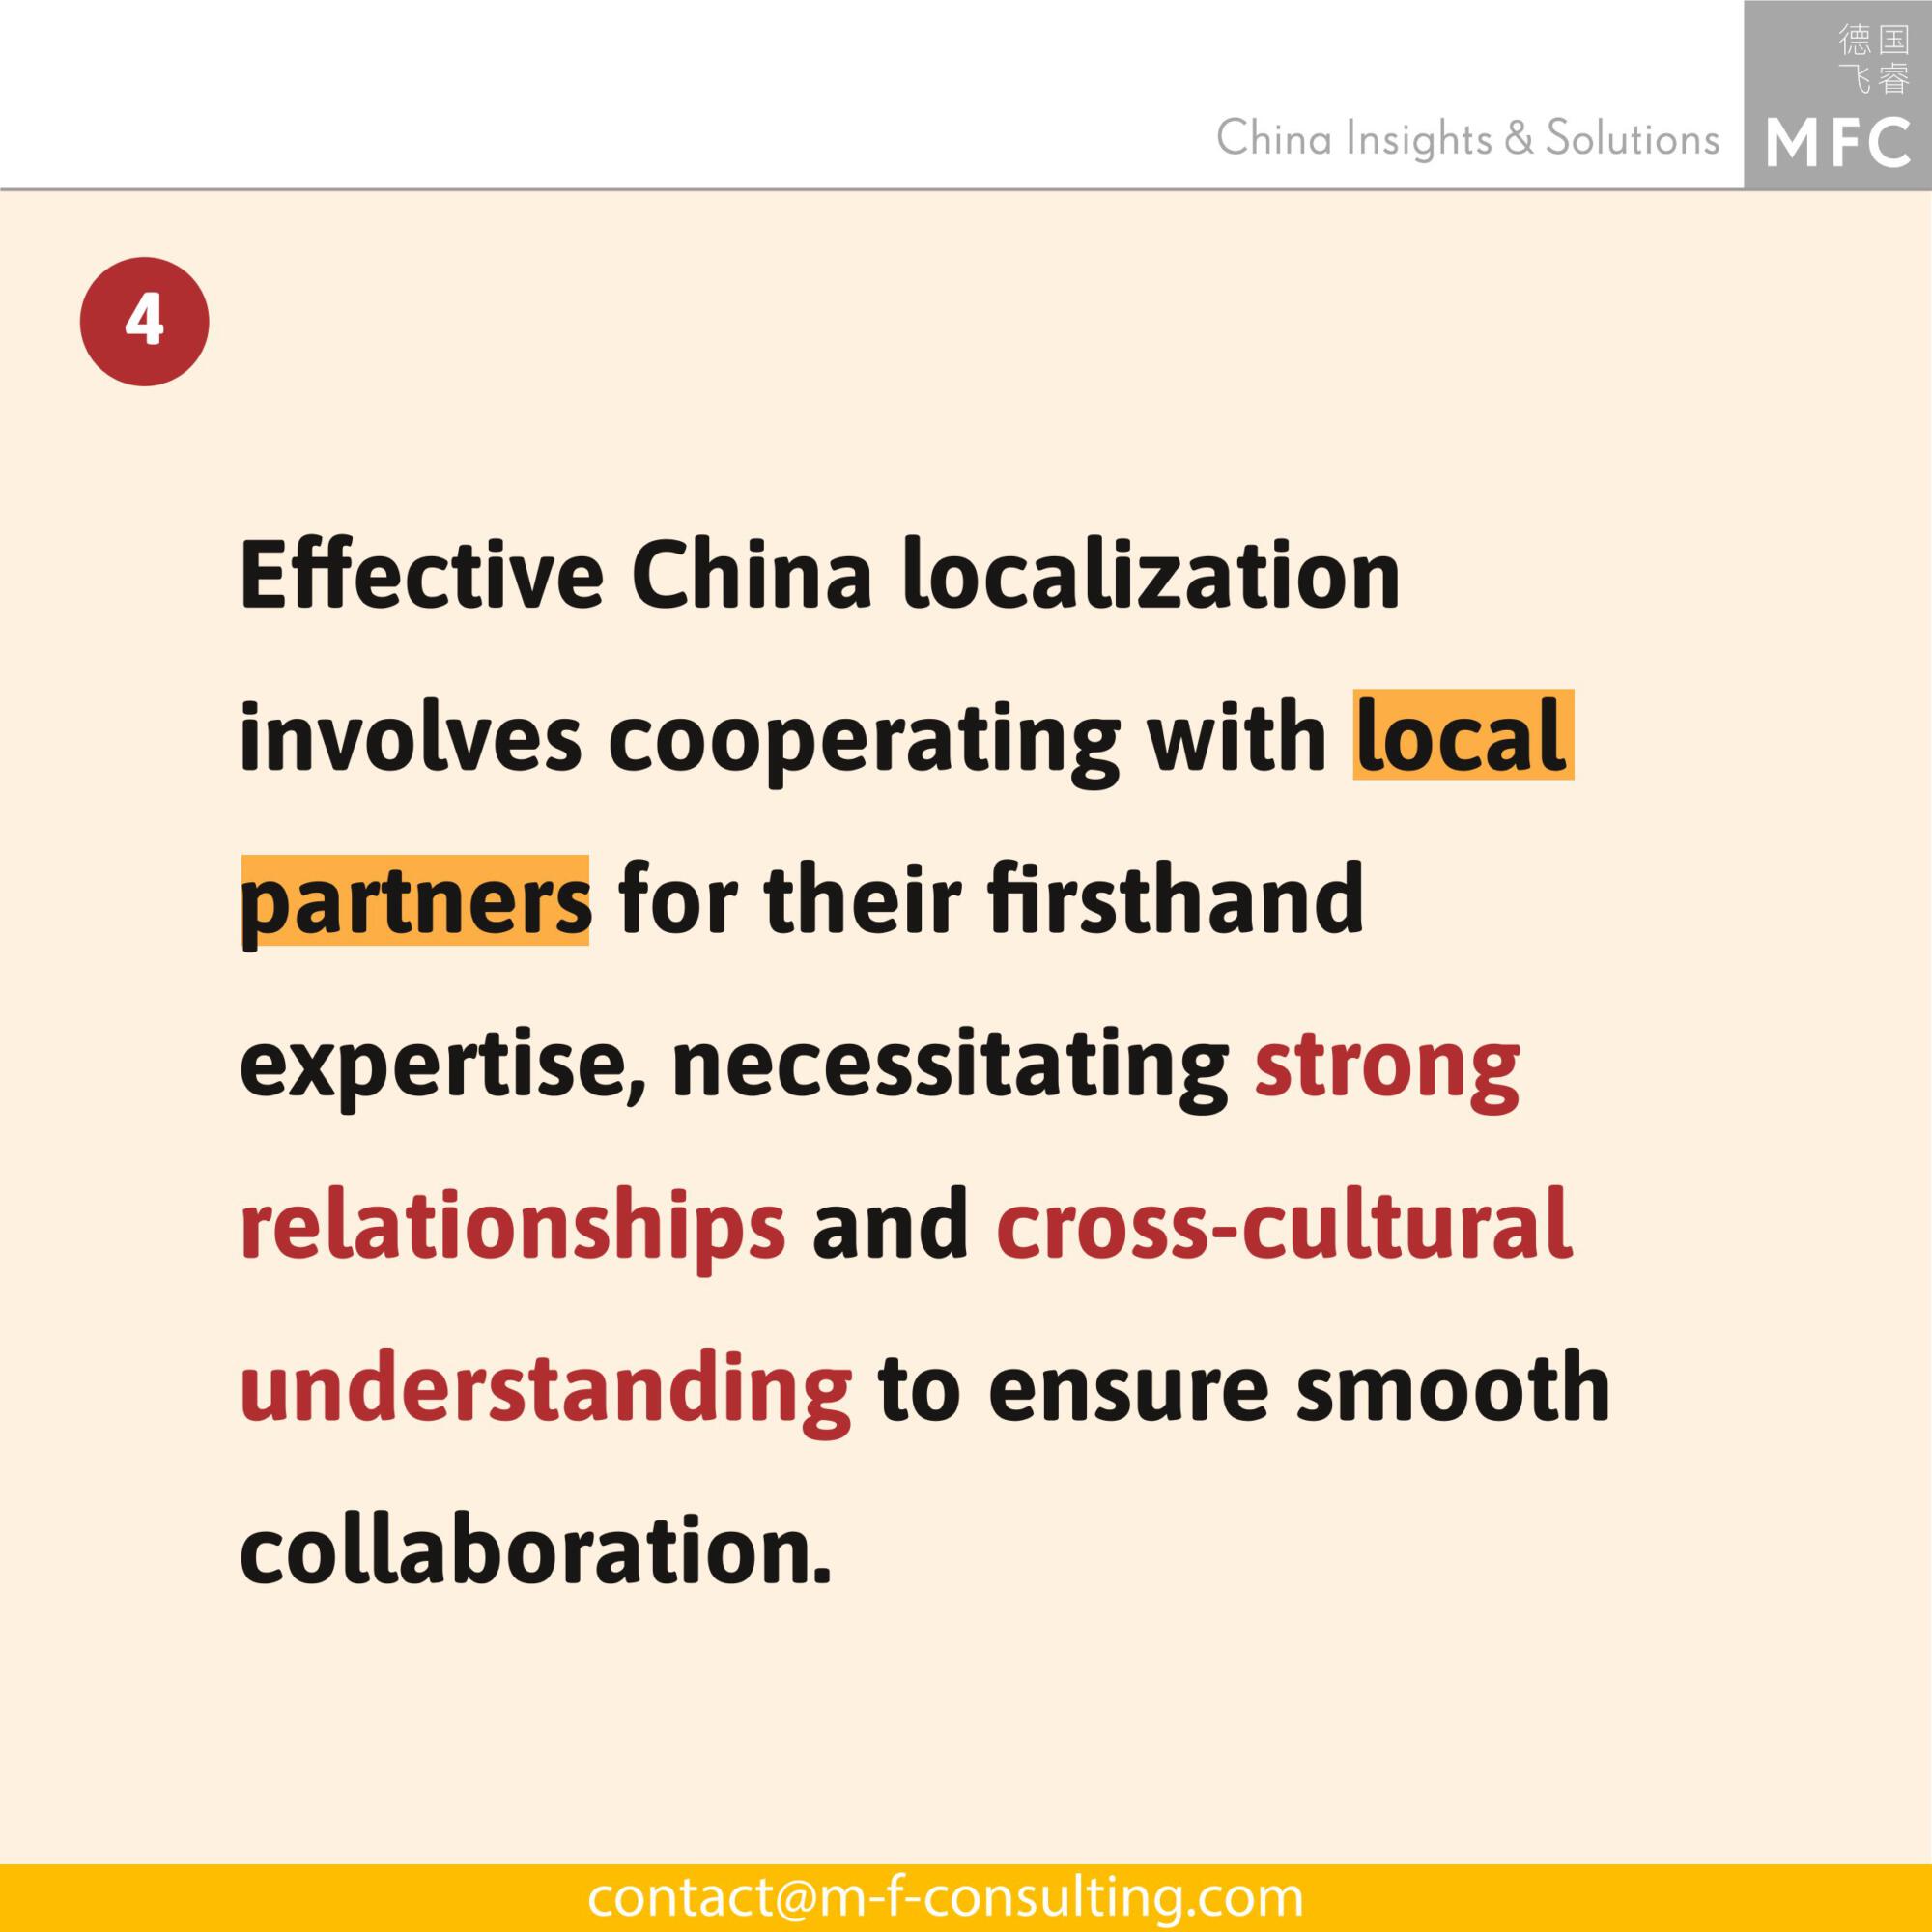 Effective China localization involves cooperating with local partners for their  firsthand expertise, necessitating strong relationships and cross-cultural collaboration.